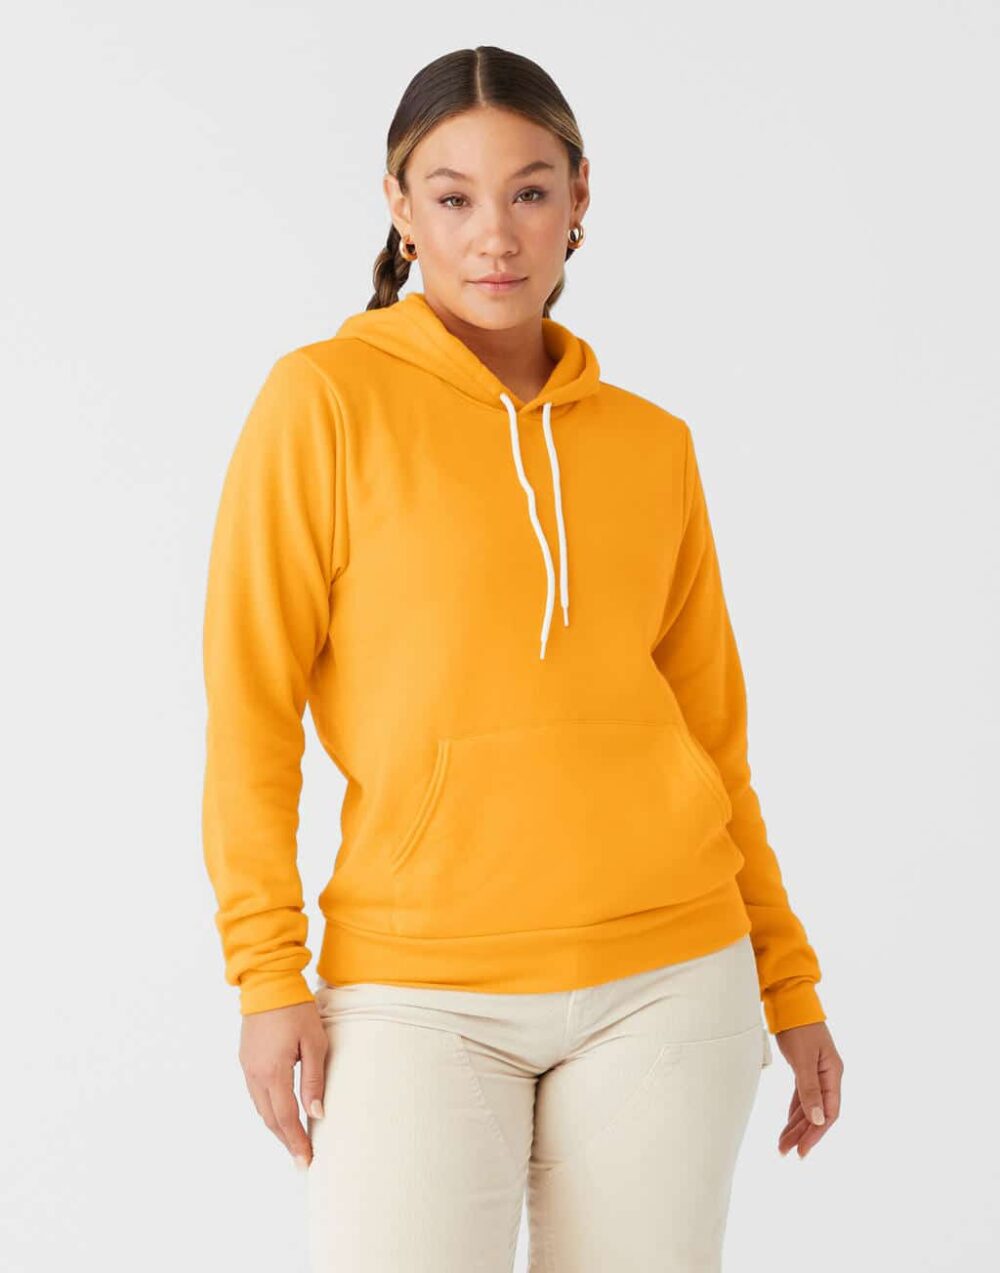 Unisex Poly-Cotton Pullover Hoodie